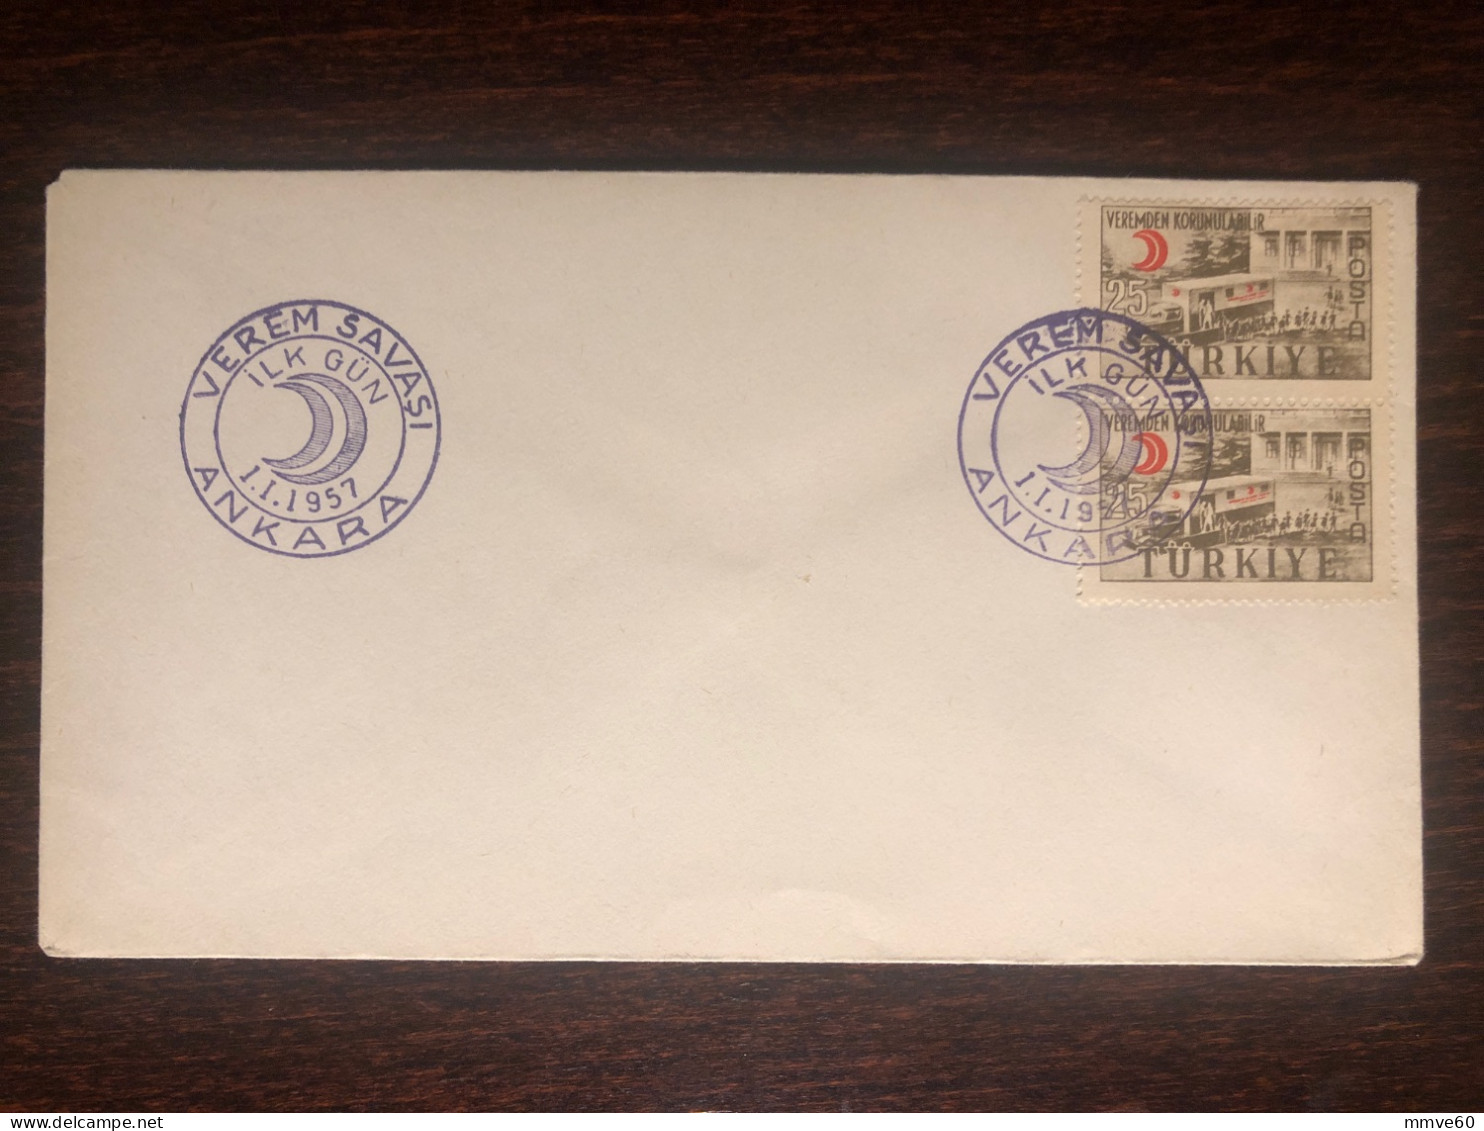 TURKEY FDC COVER 1957 YEAR TUBERCULOSIS CHEST X-RAY RED CRESCENT HEALTH MEDICINE STAMPS - FDC